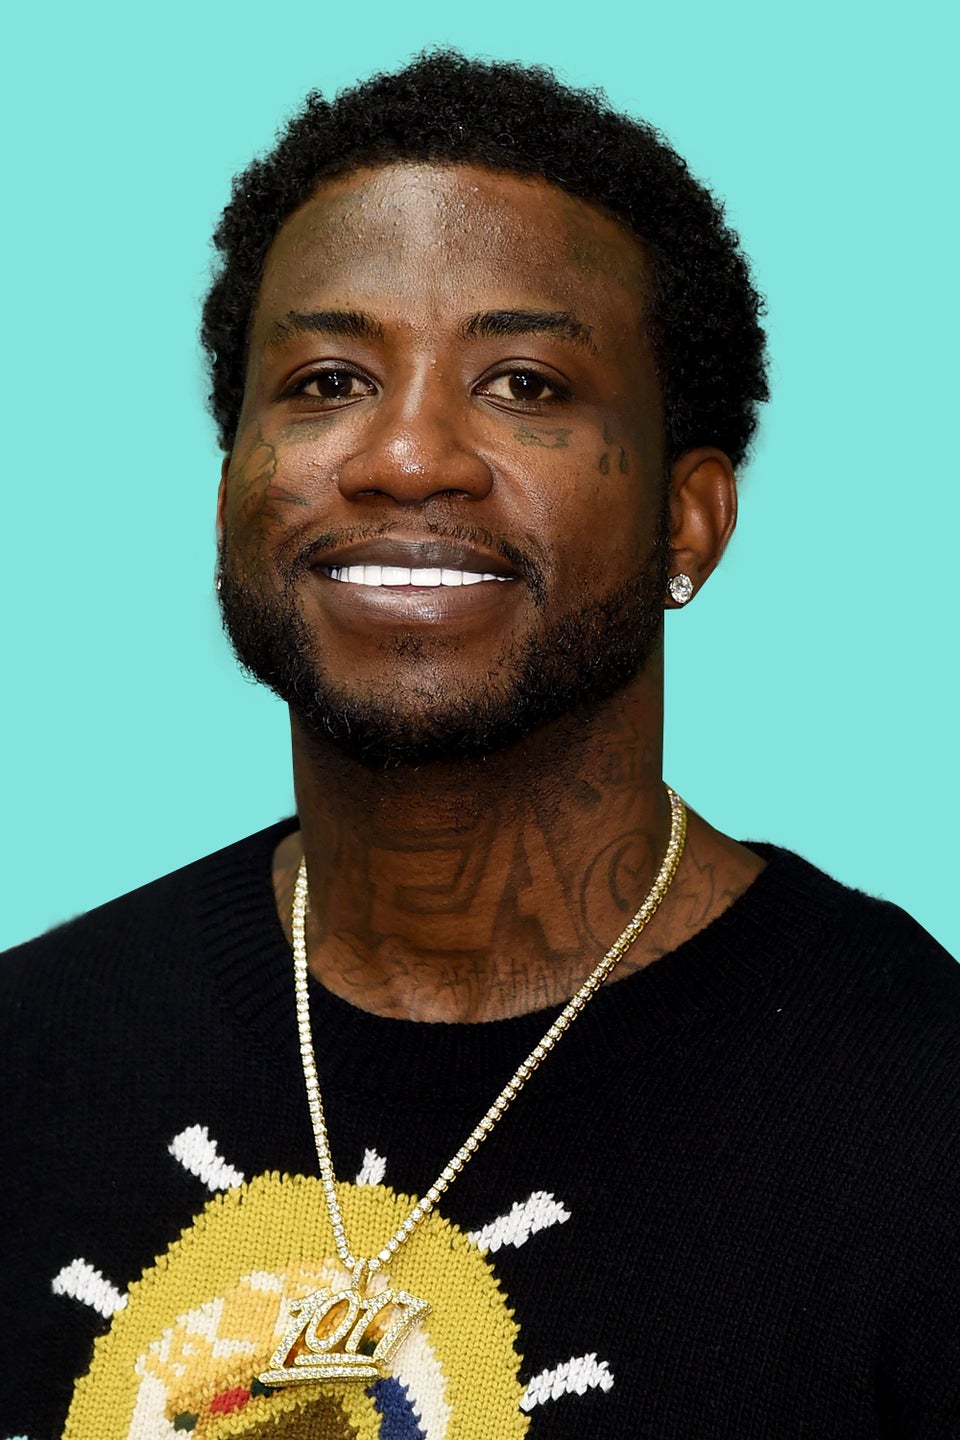 Gucci Mane Says Going To Prison ‘100 Percent’ Saved His Life: ‘I Was Outta Control’